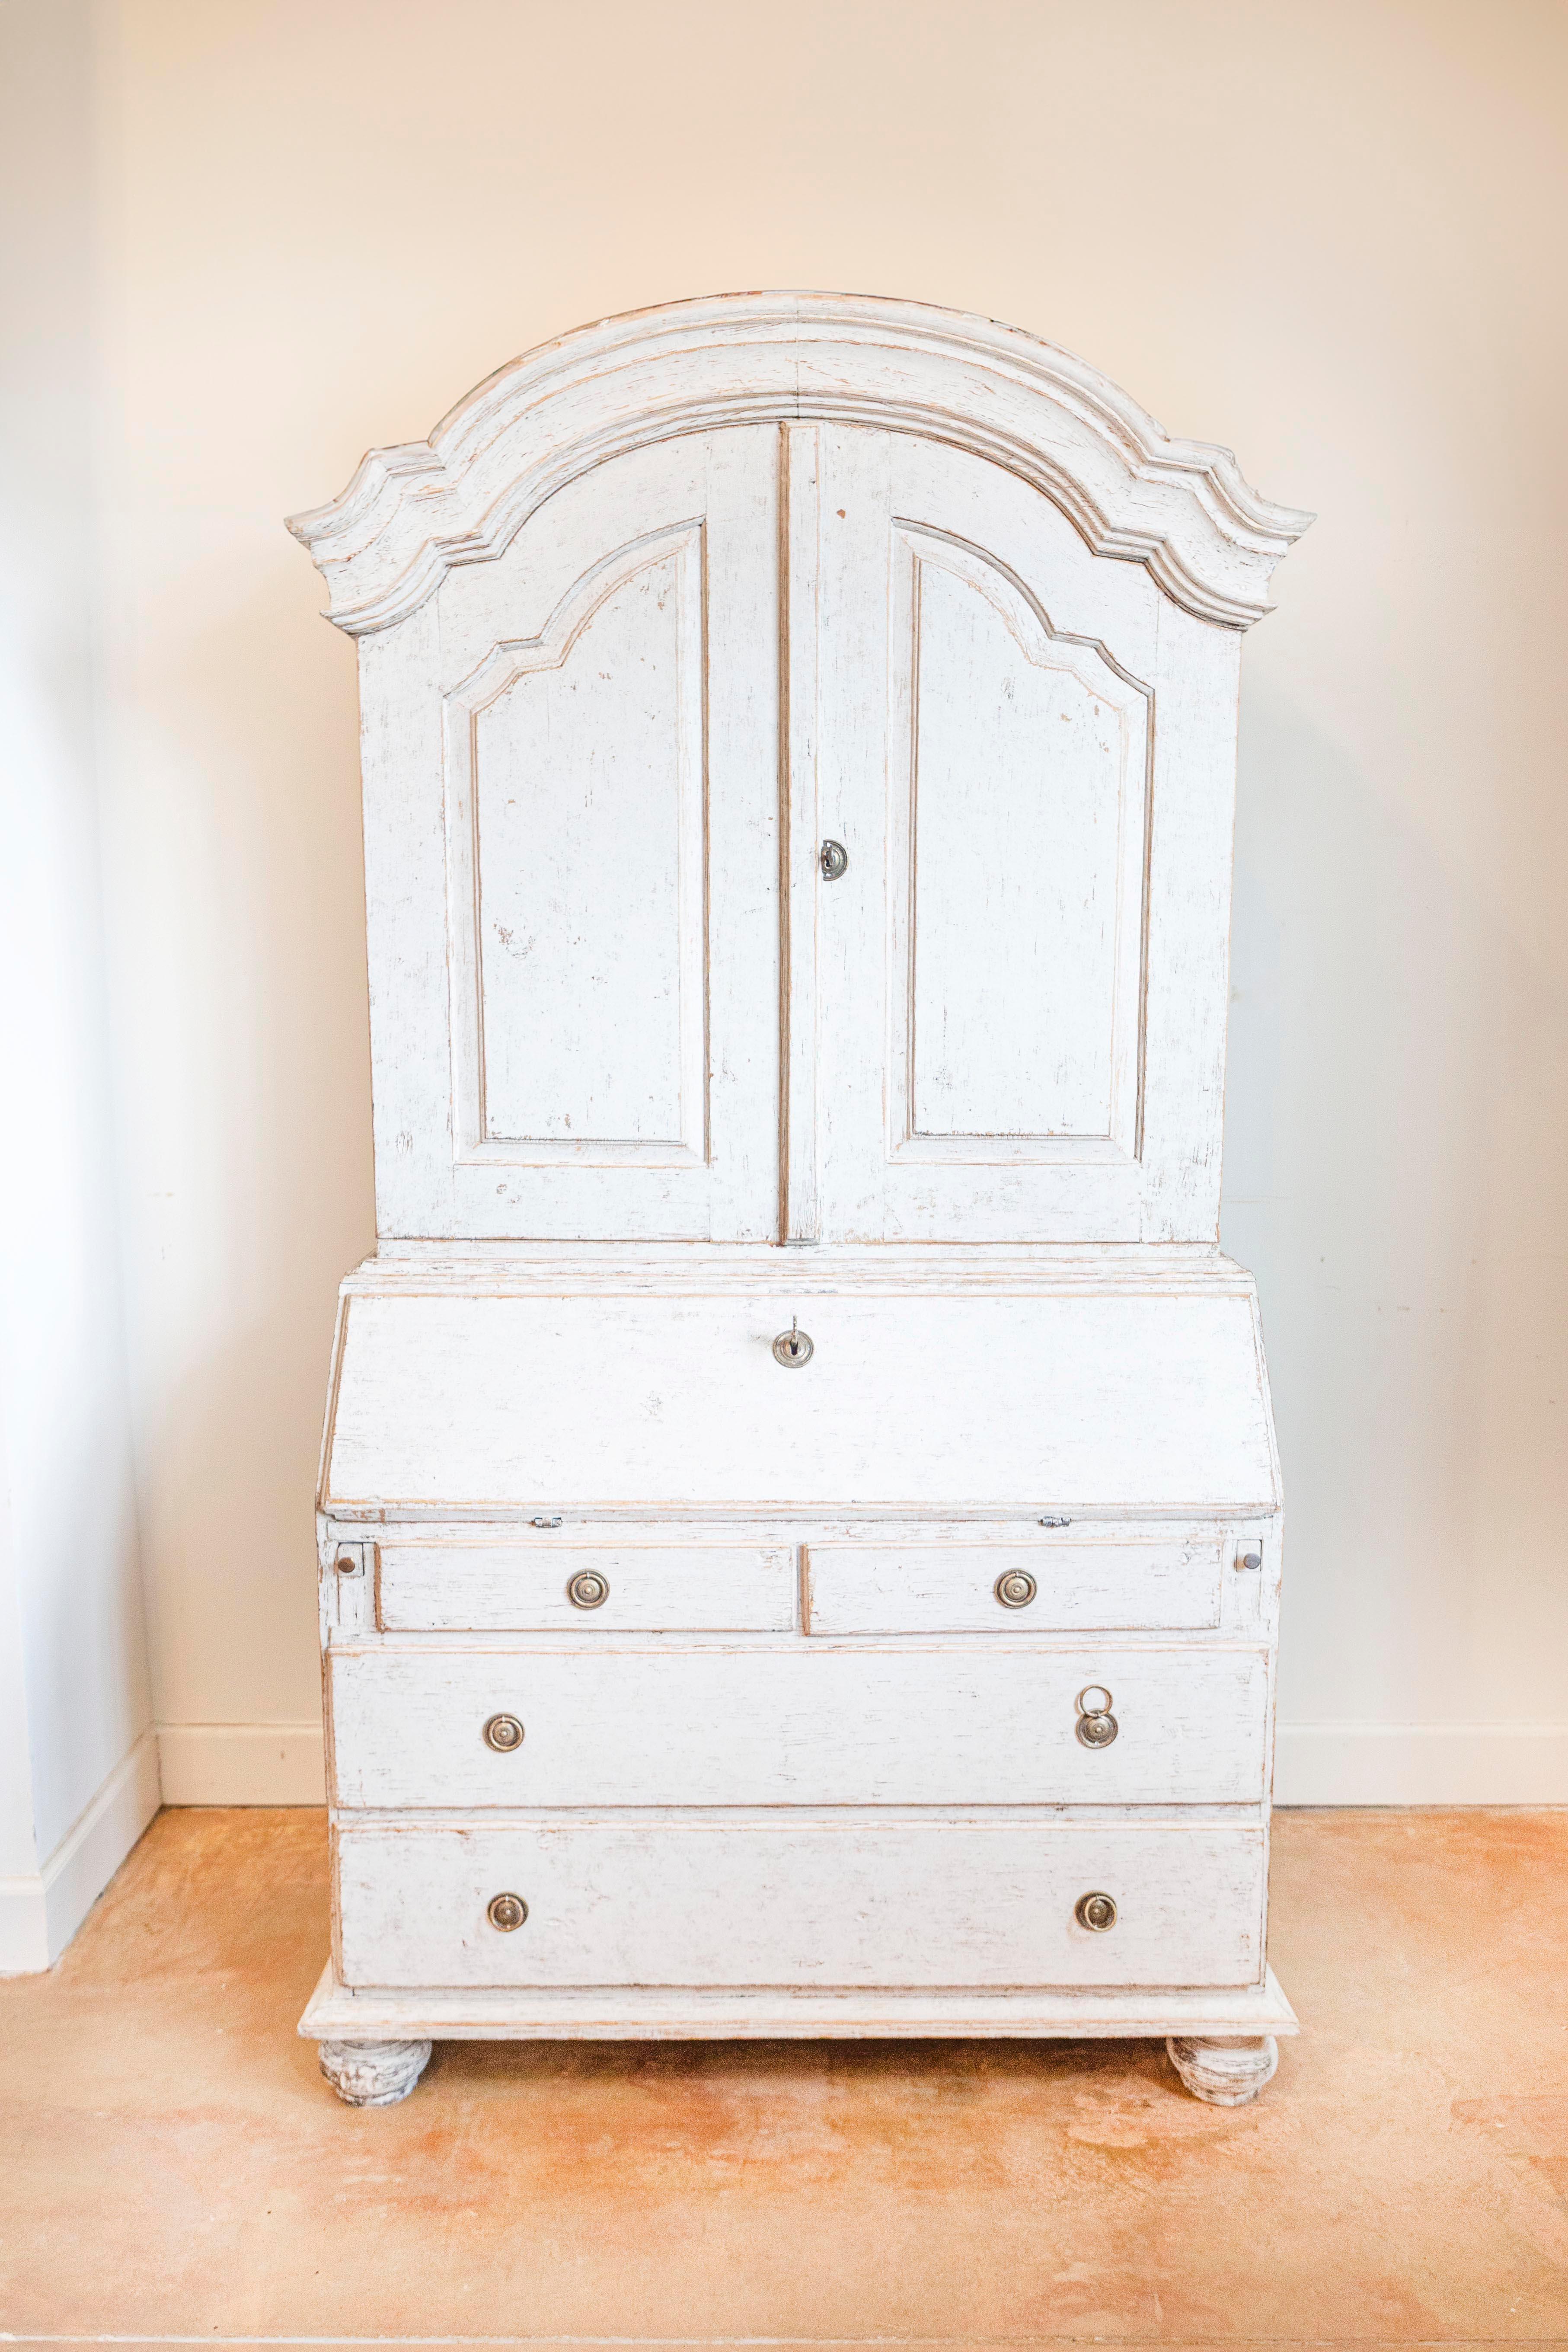 A Swedish Rococo style tall secretary from circa 1820 with gray painted finish, chapeau de gendarme bonnet top, two doors, slant-front desk and four drawers below. This Swedish Rococo-style tall secretary, dating back to around 1820, is a testament